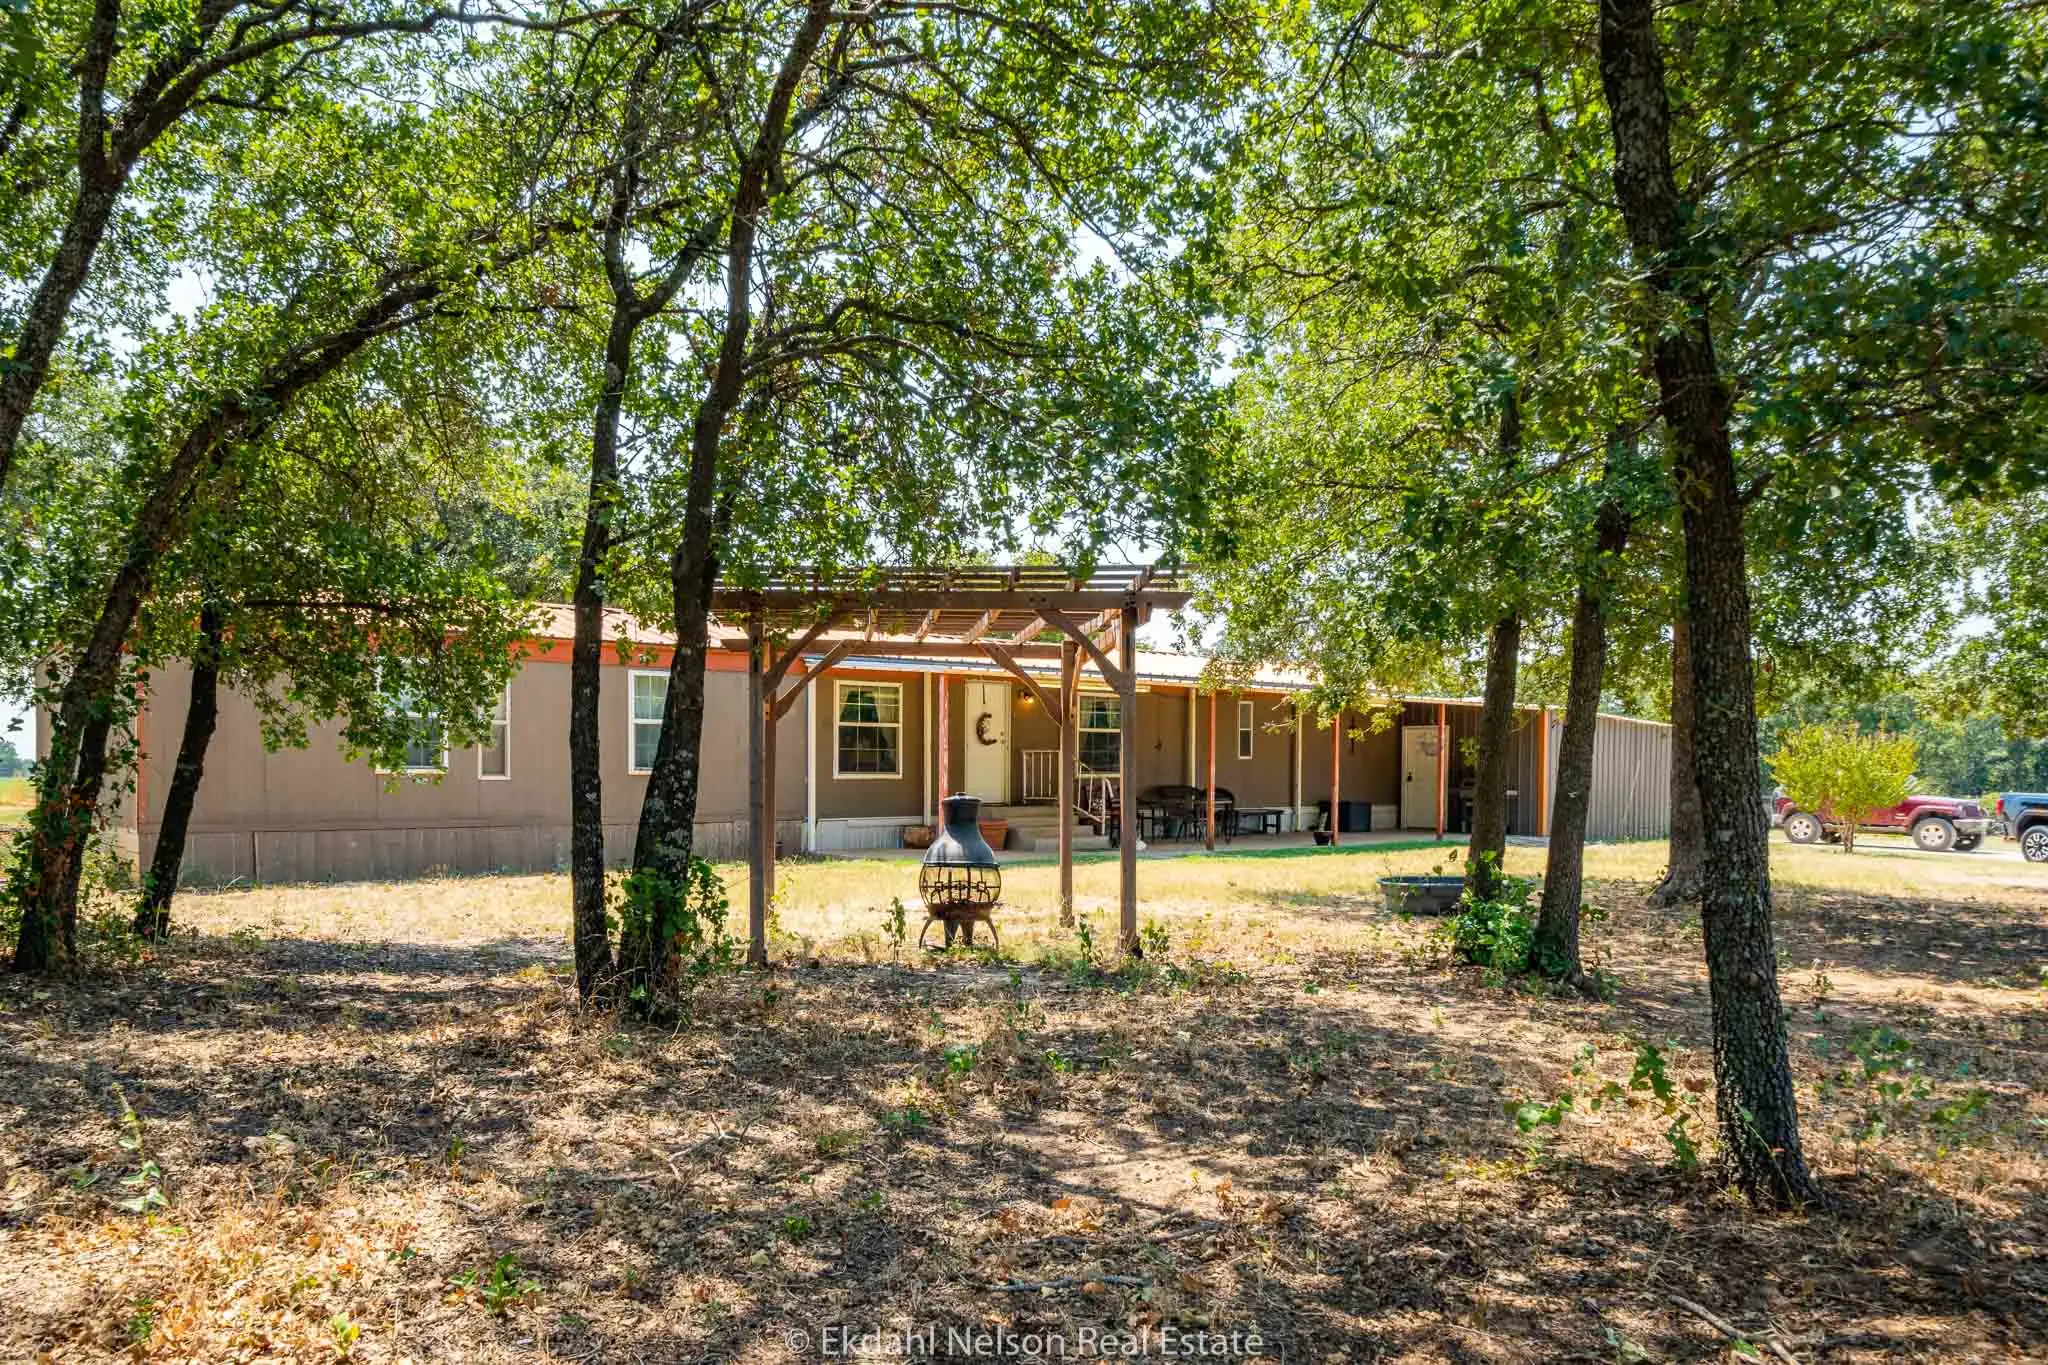 Image of a Texas home on 5 acres to convey the best Texas Real Estate Tips - Ekdahl Nelson Real Estate